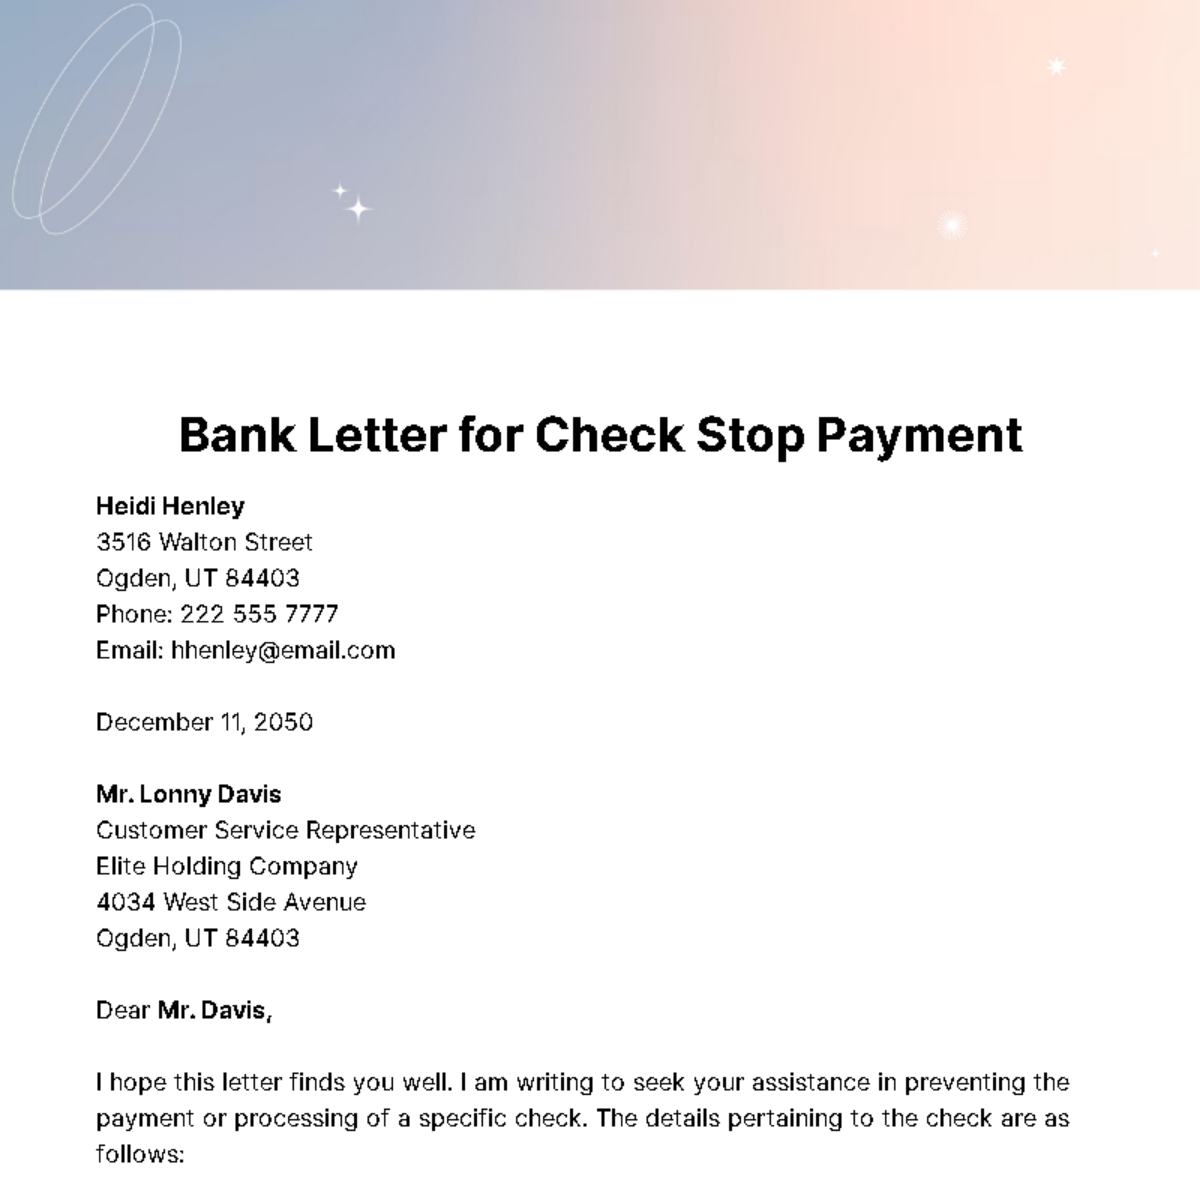 Bank Letter for Check Stop Payment Template